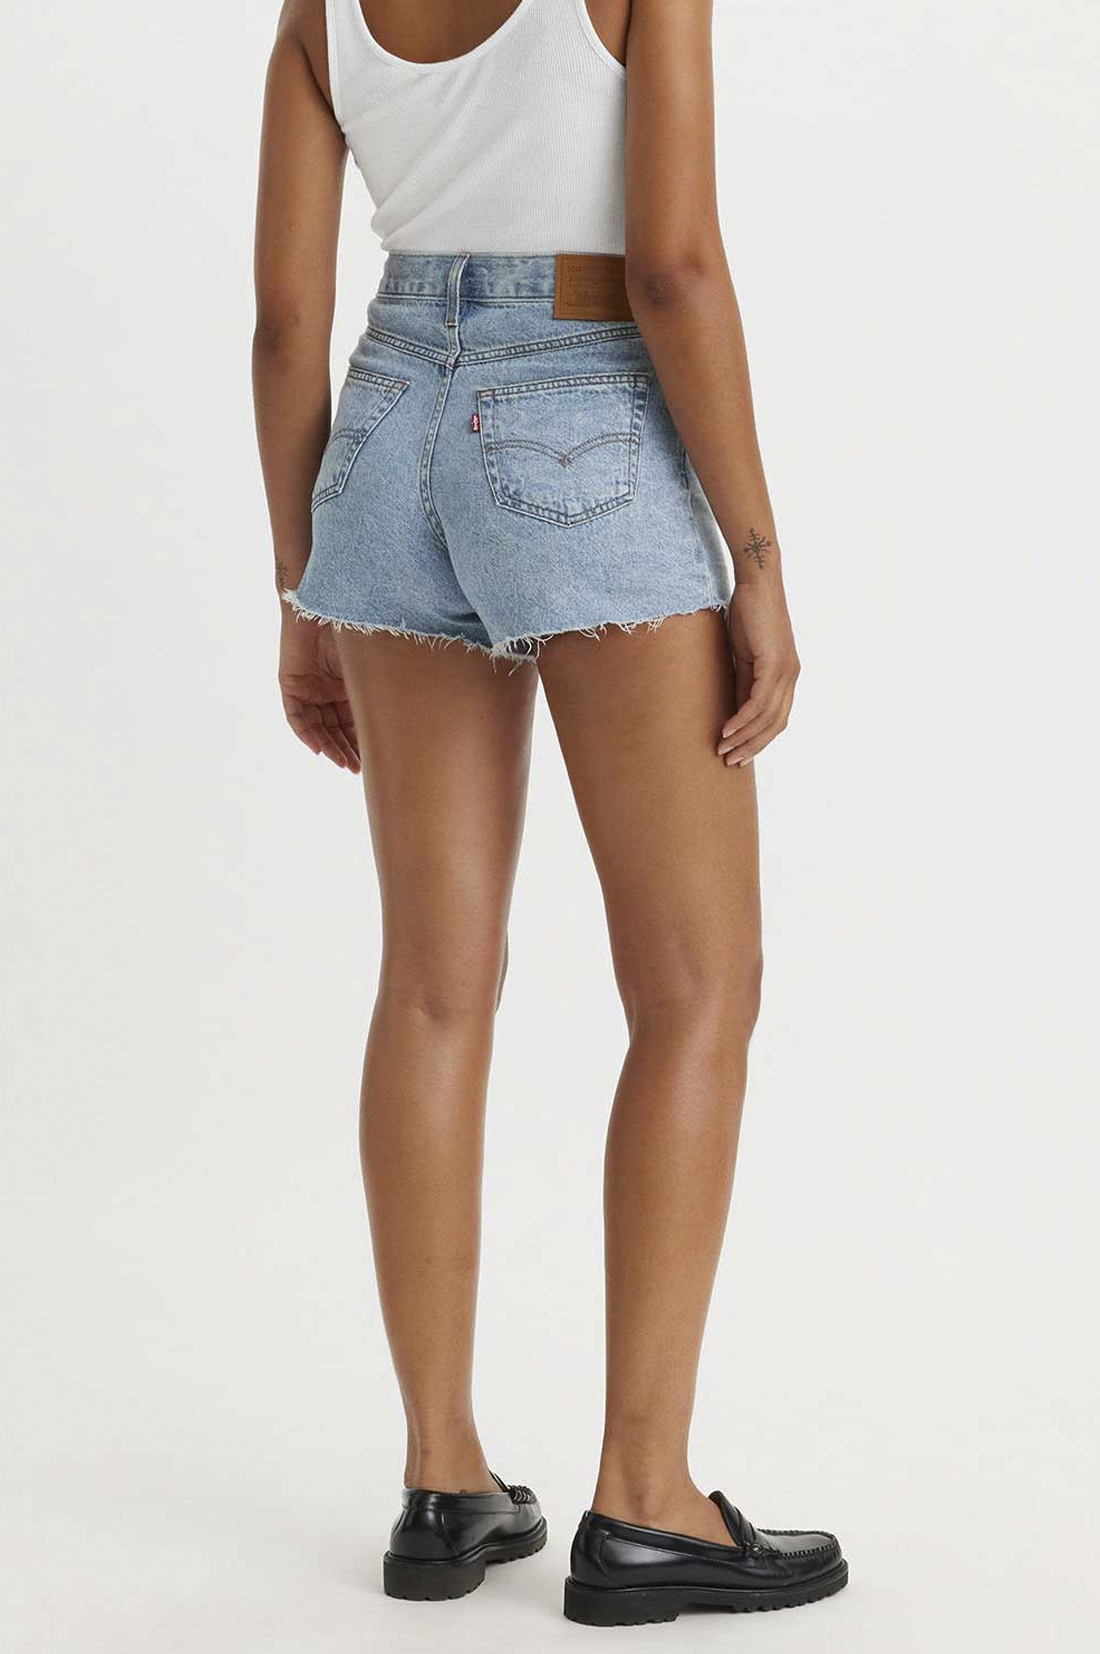 Women's Levi's 80's Mom Short in Make a Difference